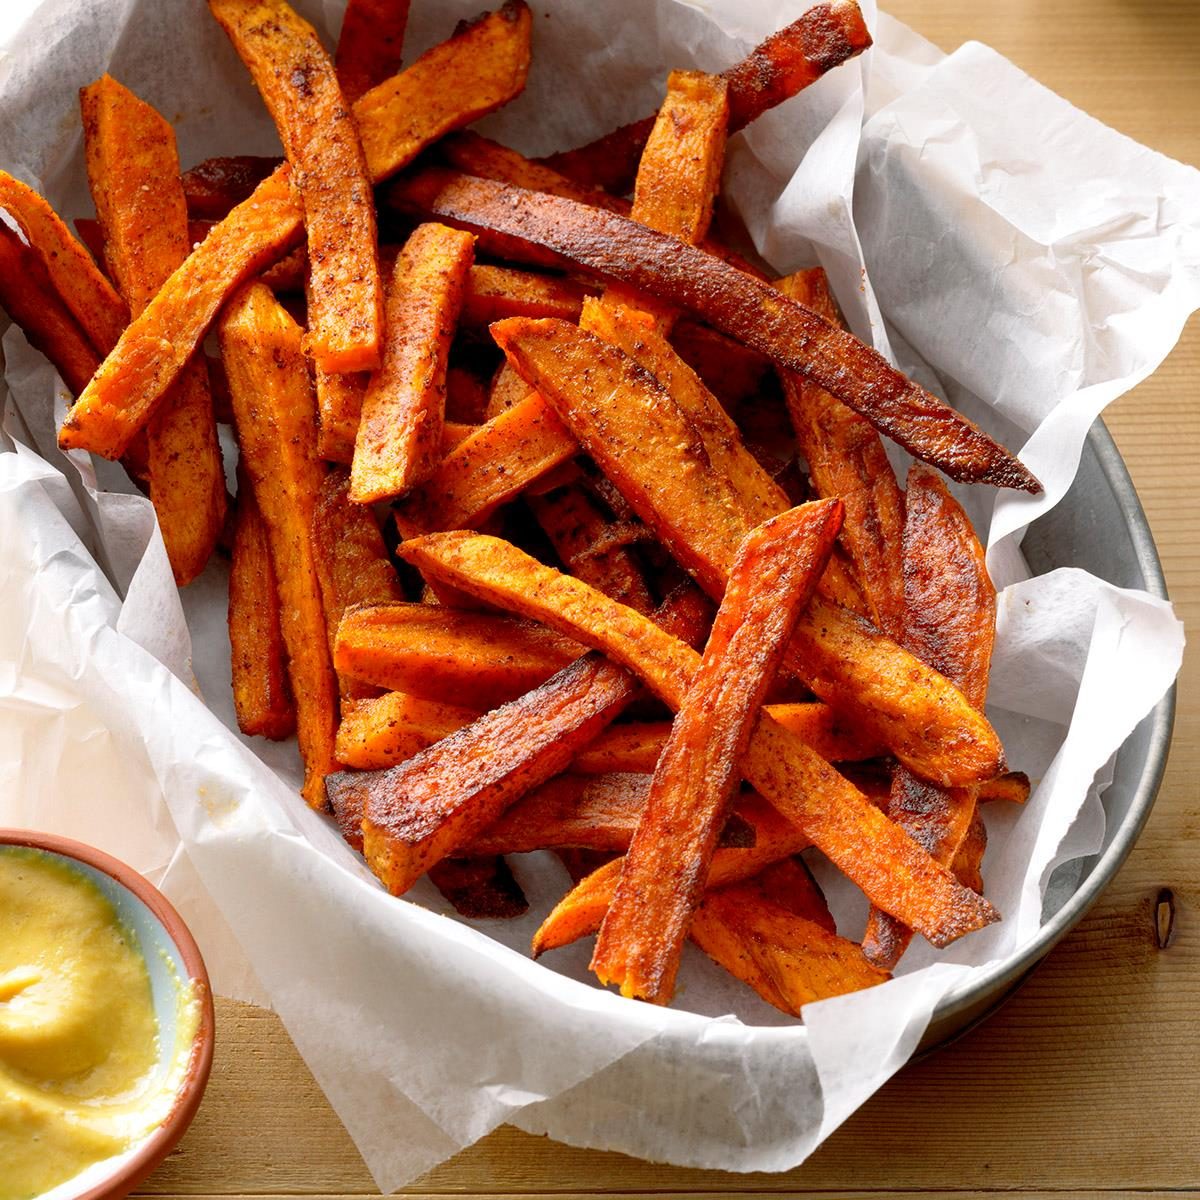 Baked Sweet Potato Fries Recipe: How to Make It